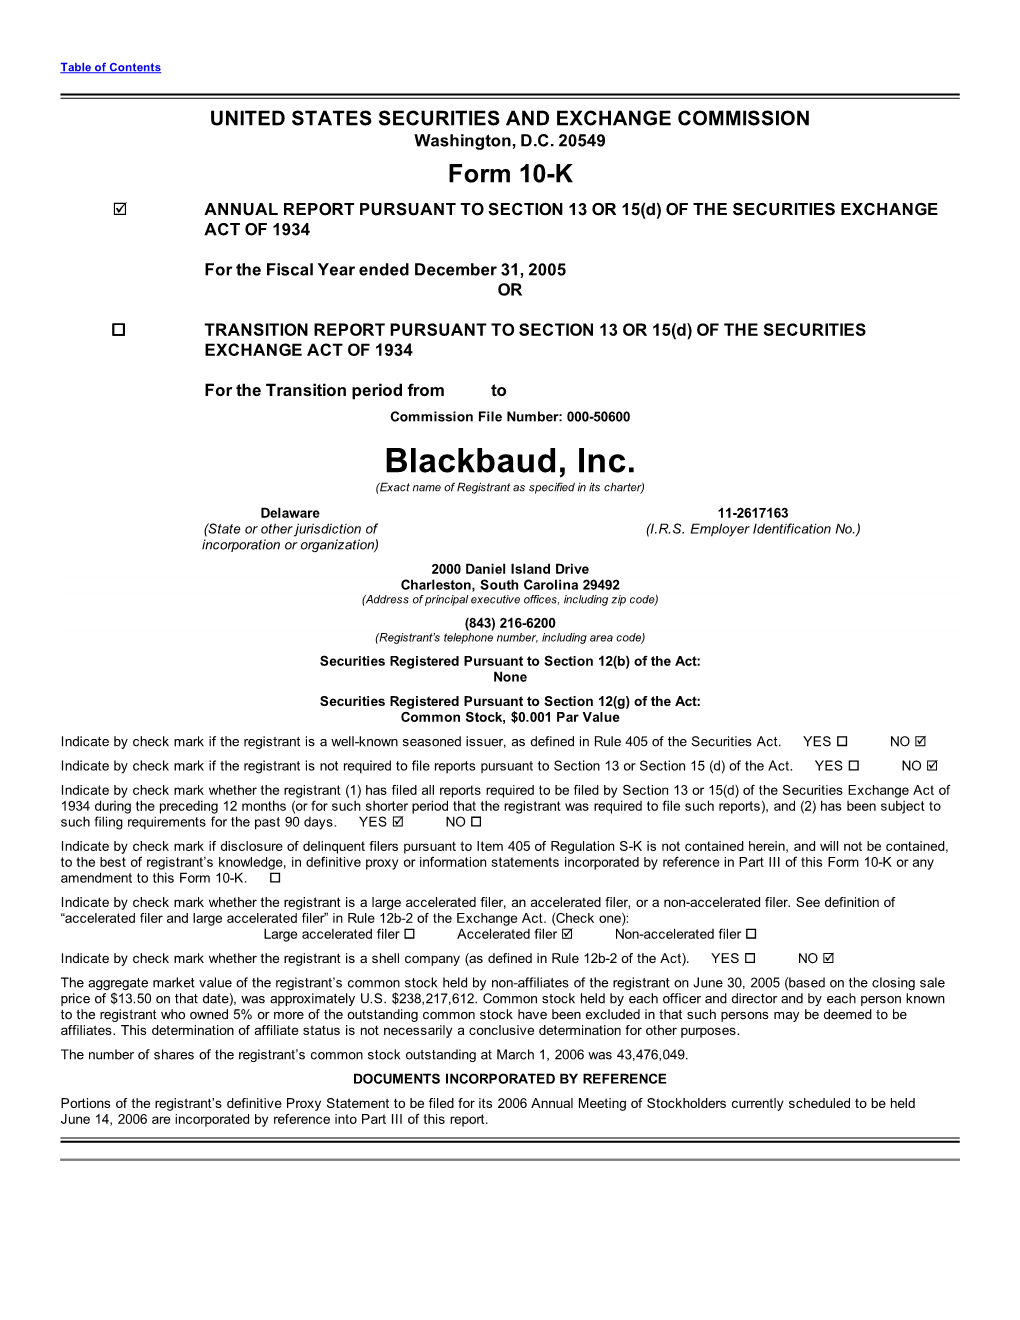 Blackbaud, Inc. (Exact Name of Registrant As Specified in Its Charter) Delaware 11-2617163 (State Or Other Jurisdiction of (I.R.S